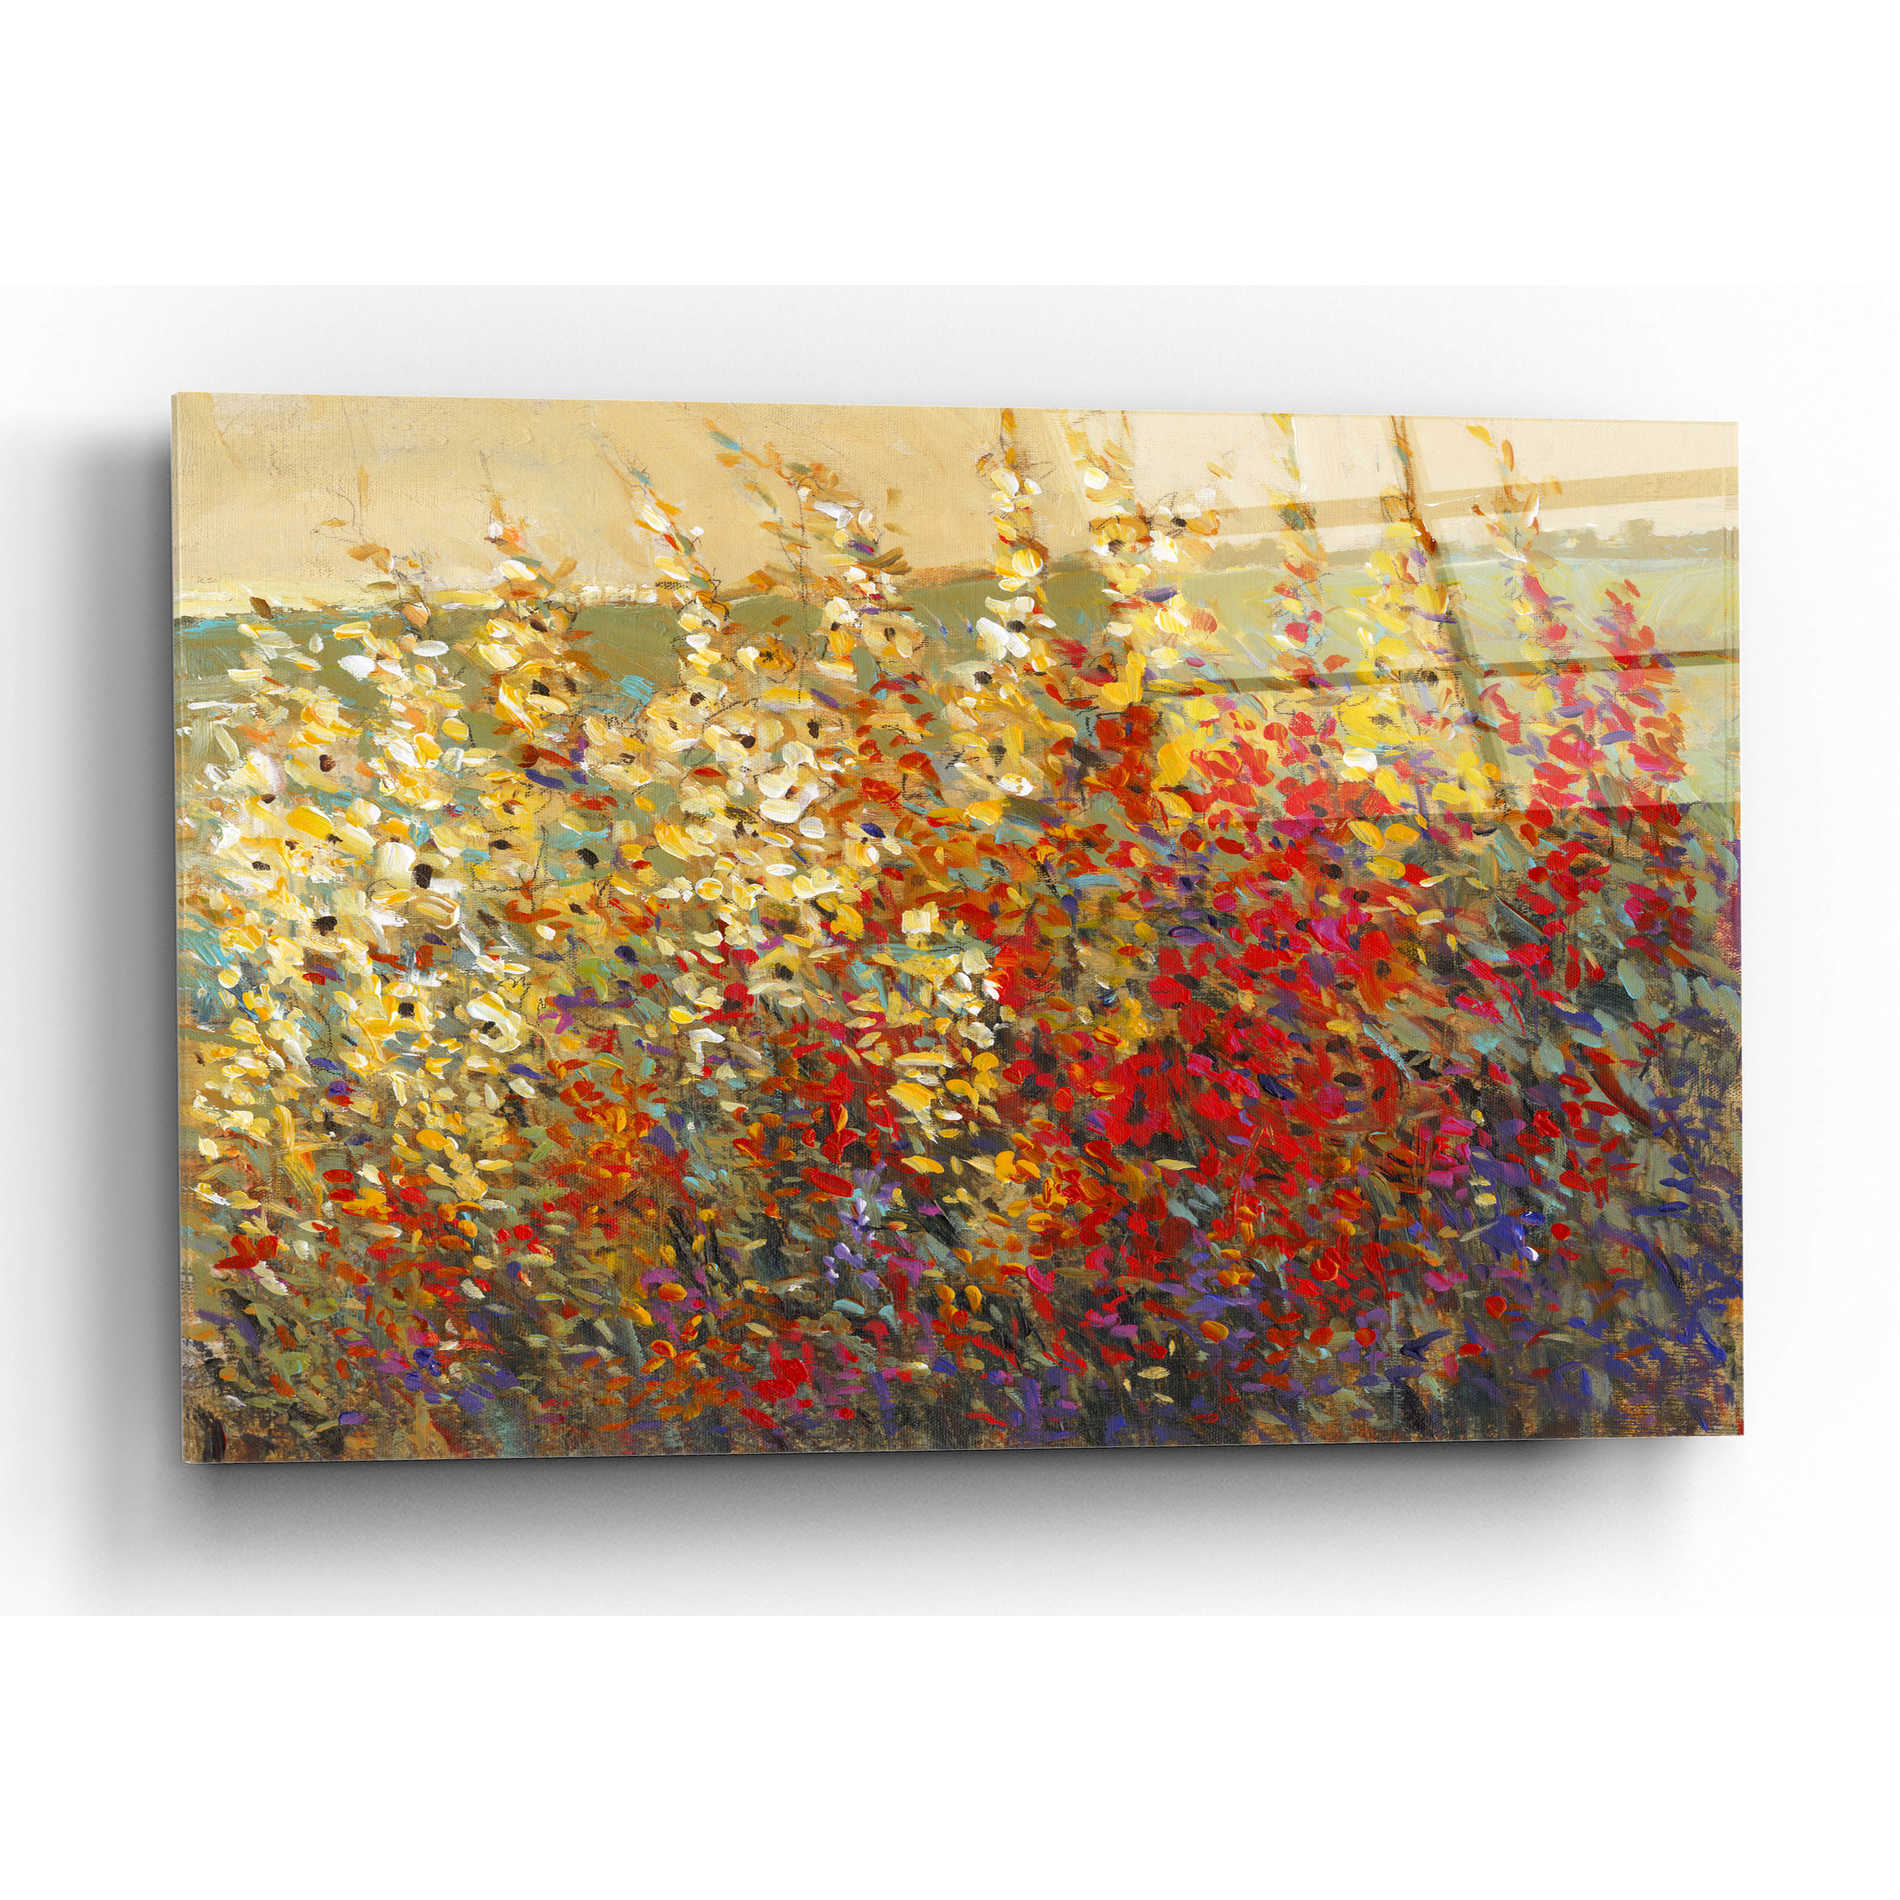 Epic Art 'Field of Spring Flowers I' by Tim O'Toole, Acrylic Glass Wall Art,16x12